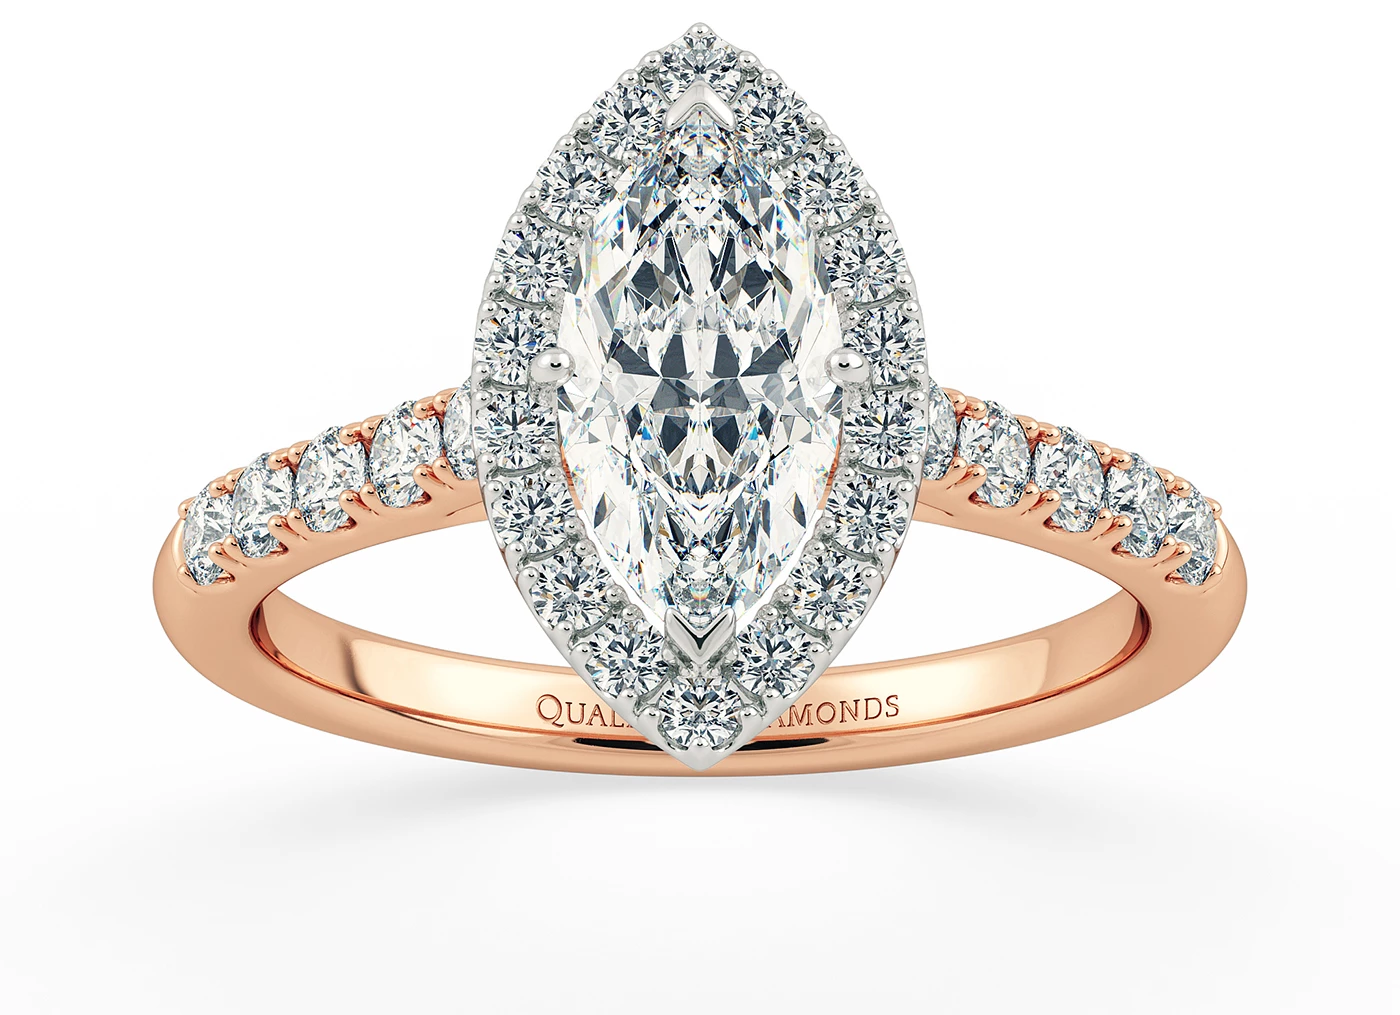 One Carat Marquise Halo Diamond Ring in 18K Rose Gold